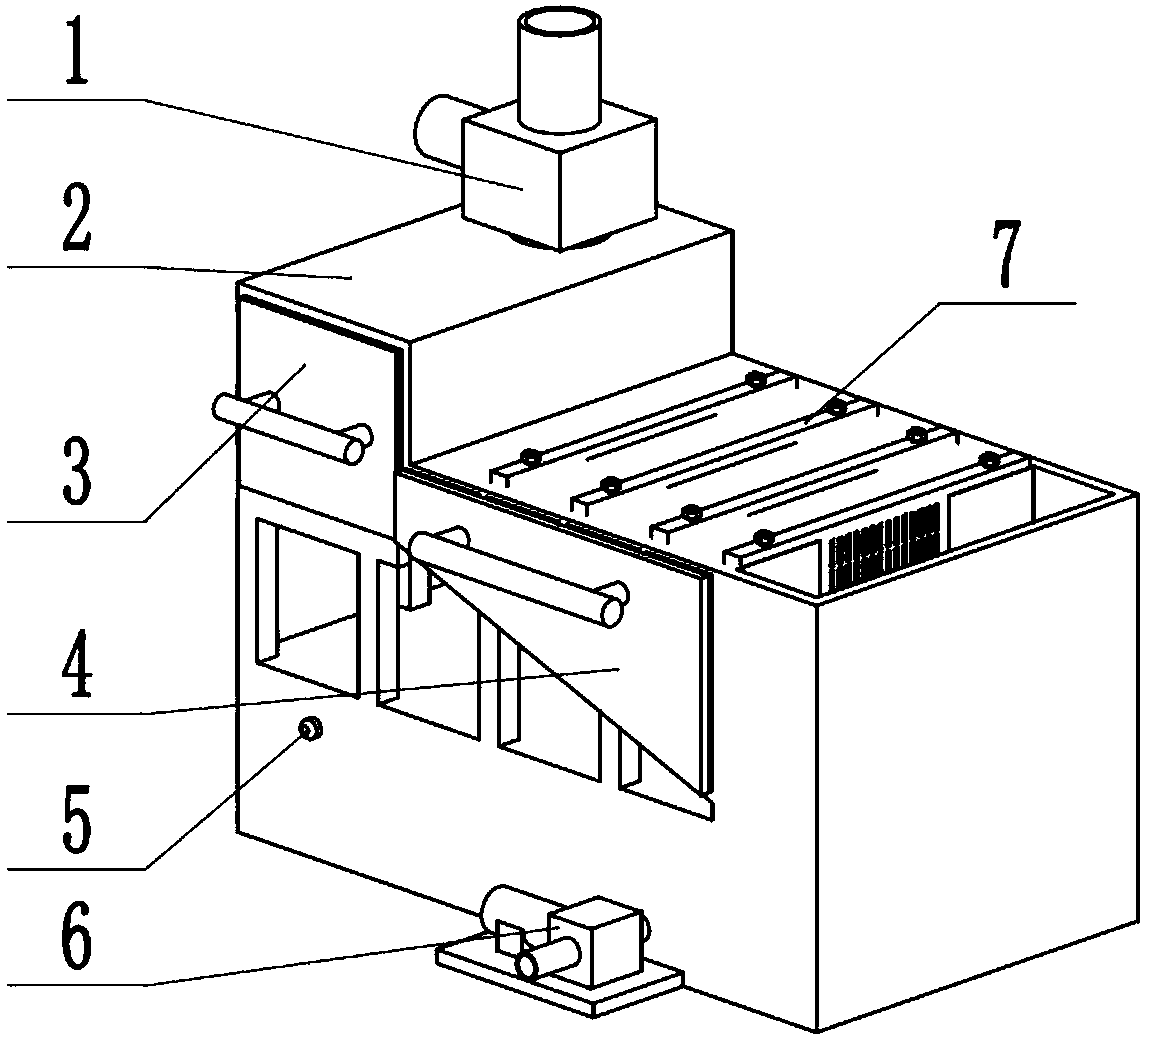 Device for treating and reusing household sewage